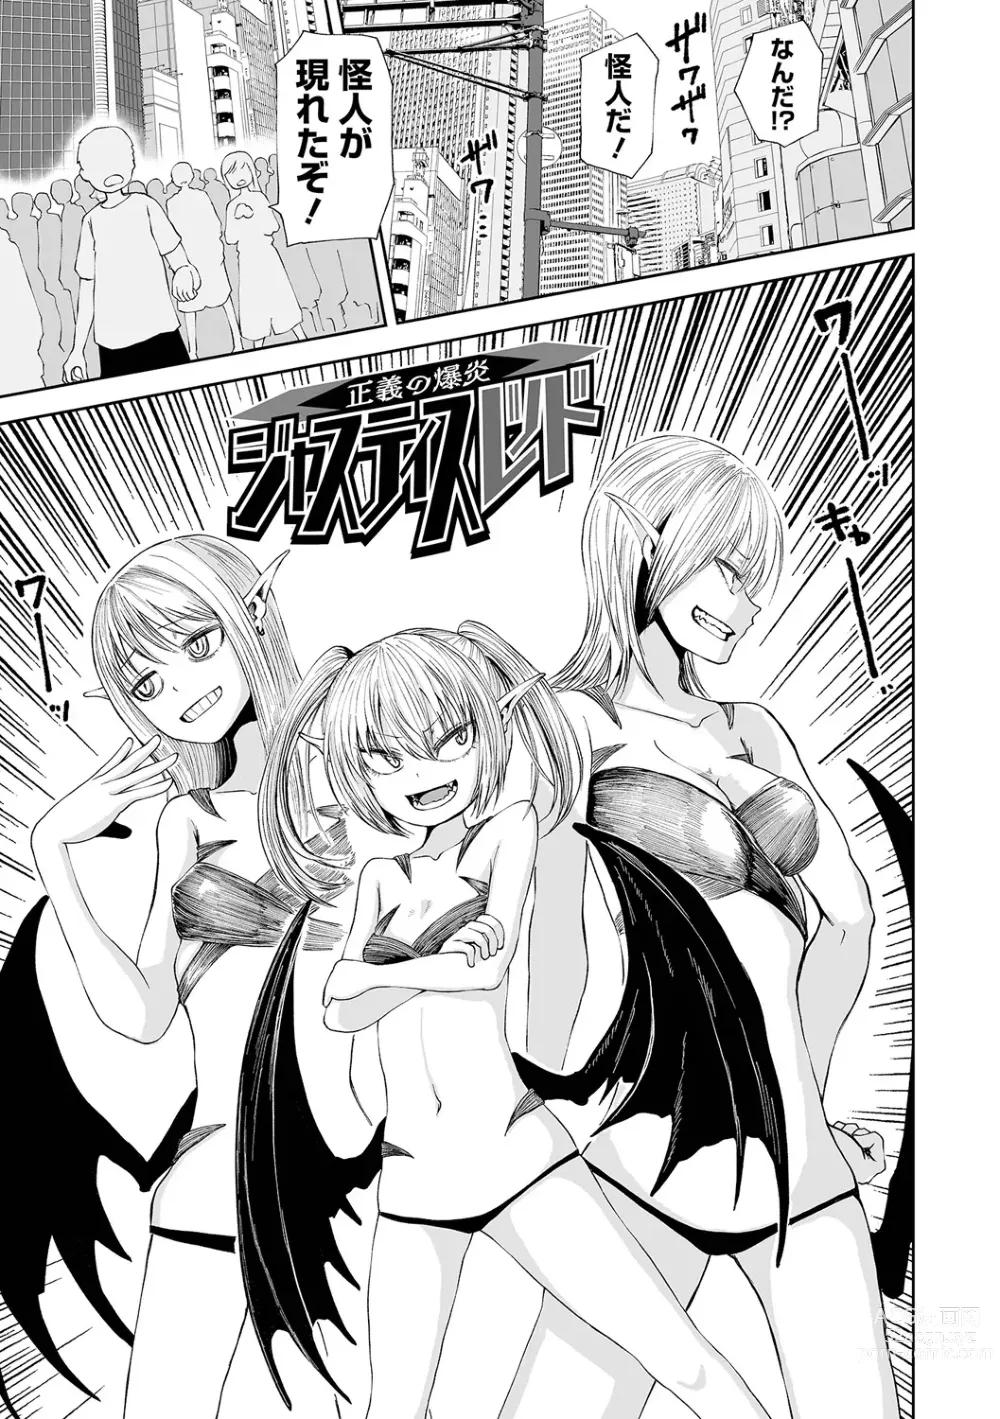 Page 171 of manga Dead End Girls